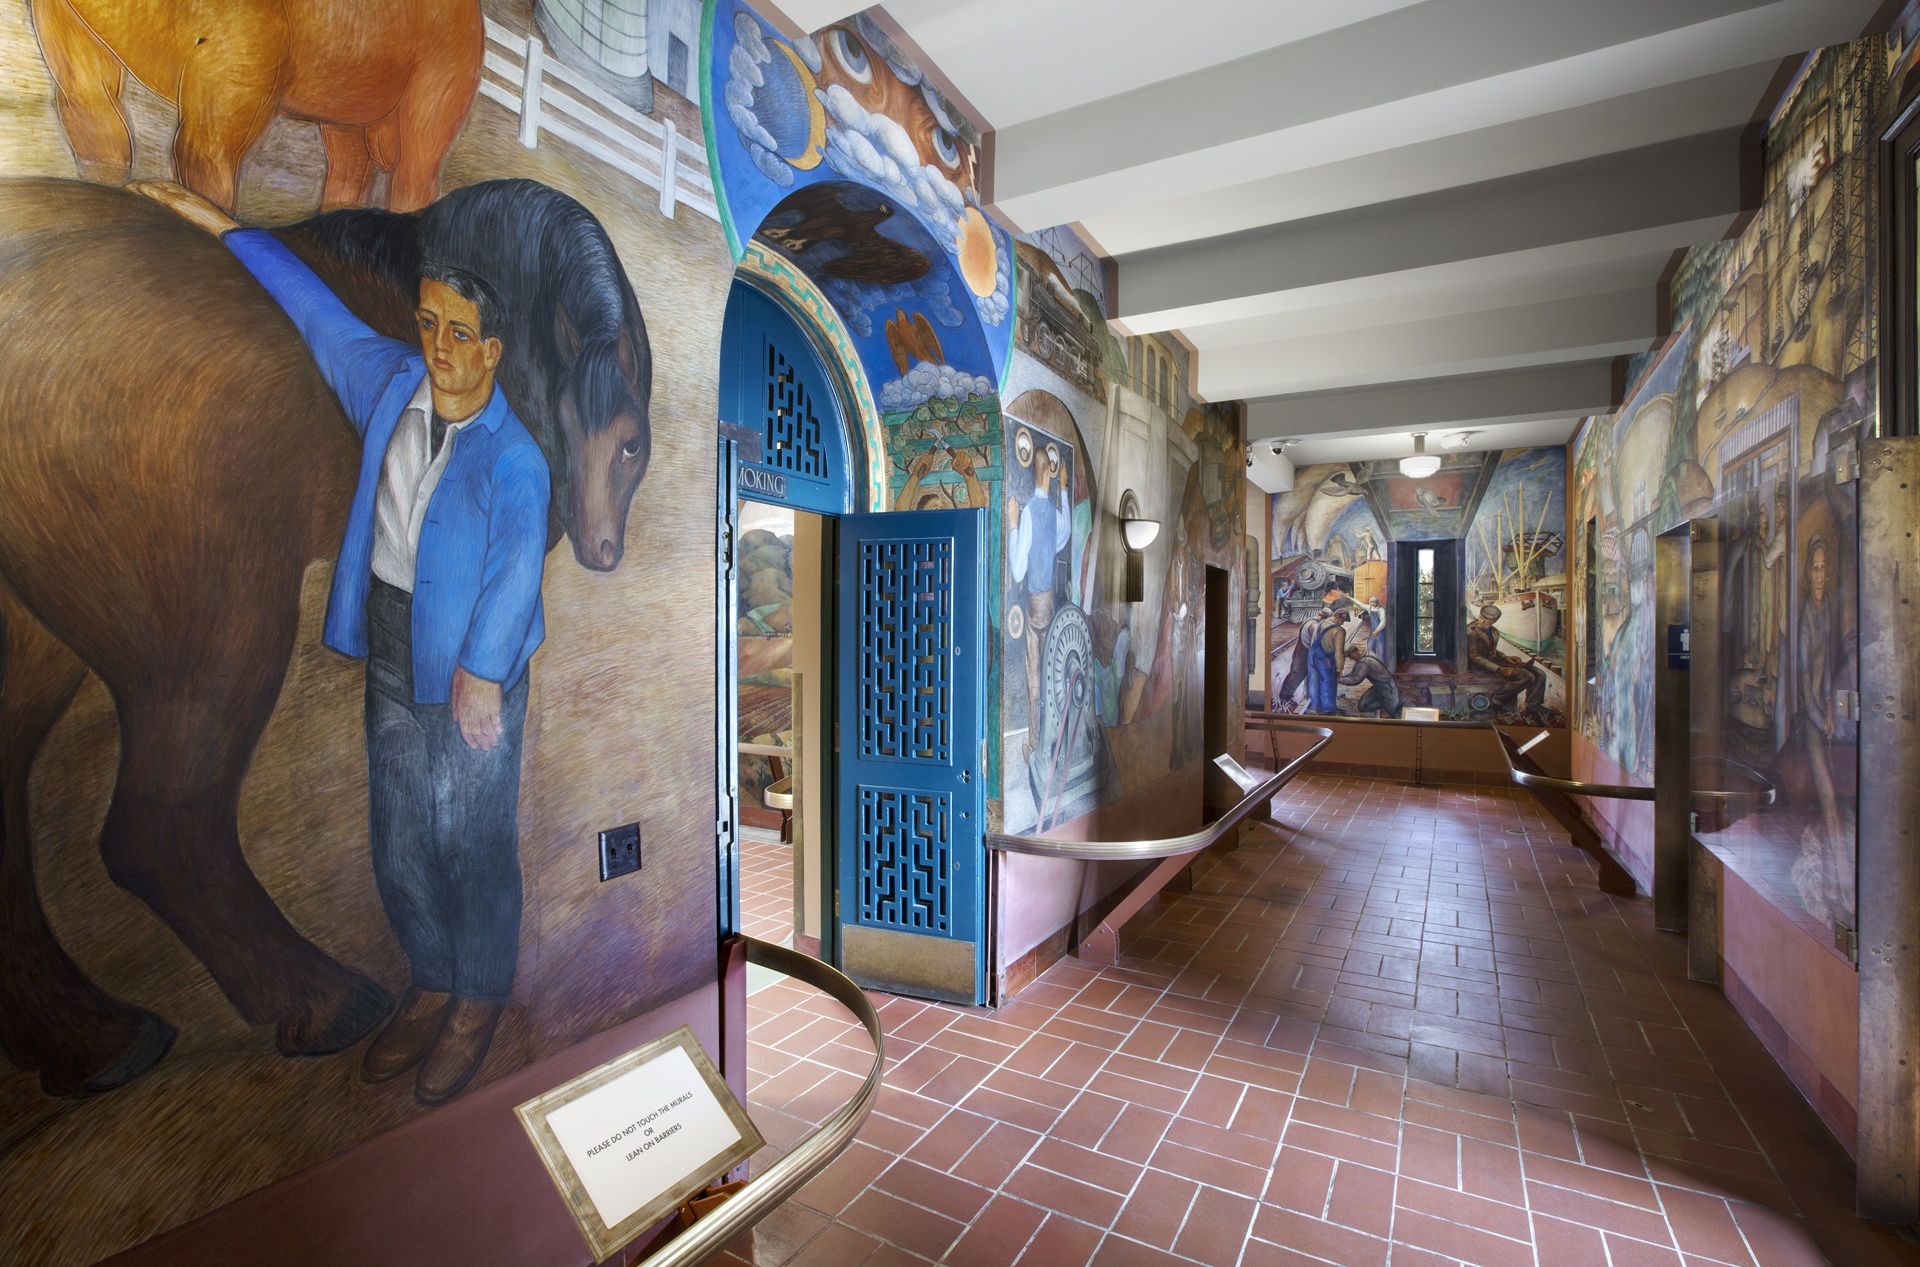 Mural on the interior of Coit Tower